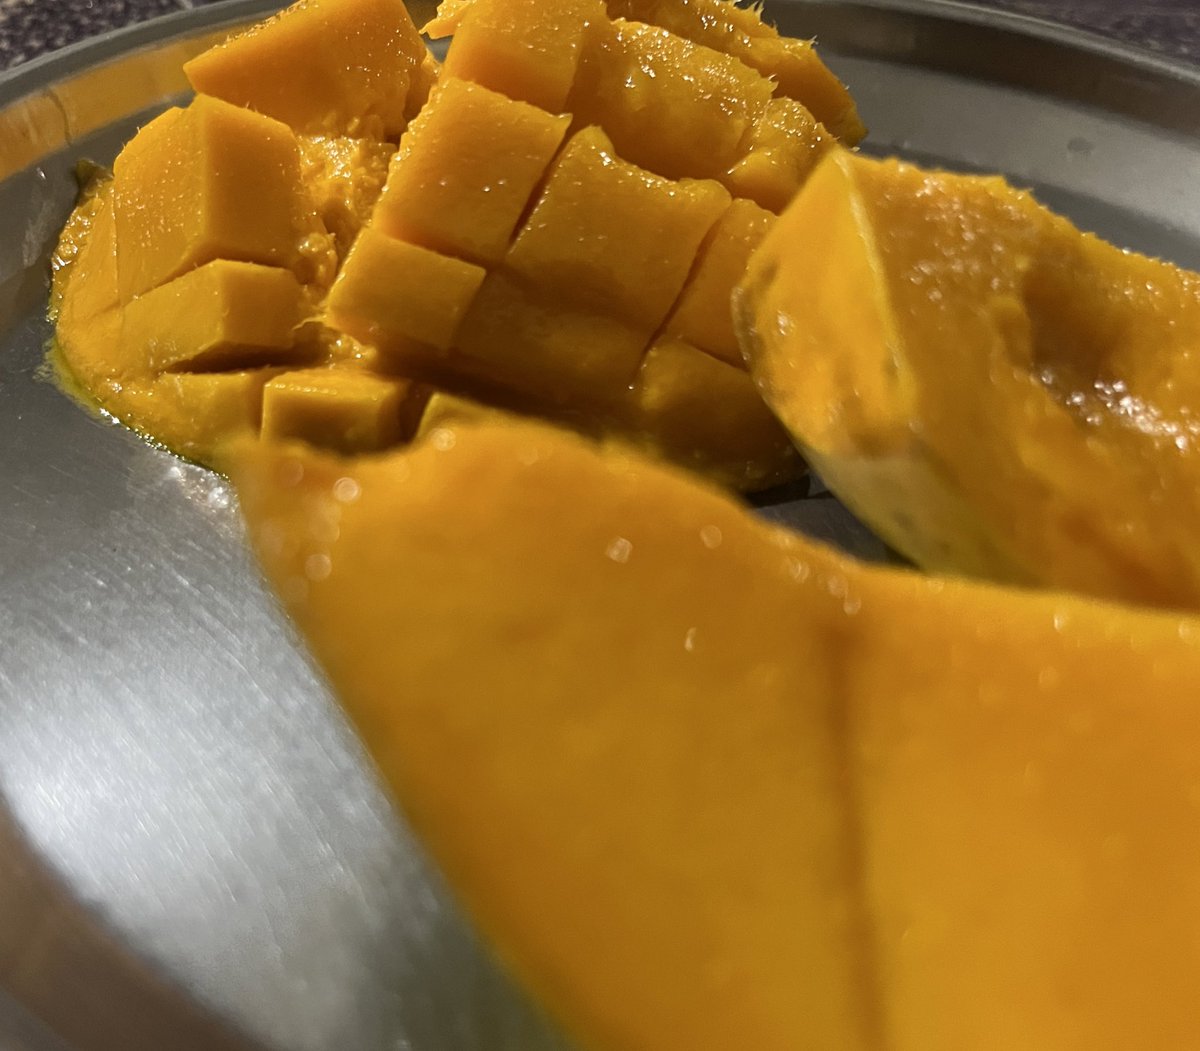 First mango of the year on new year.
#Homegrown #HappyUgadi